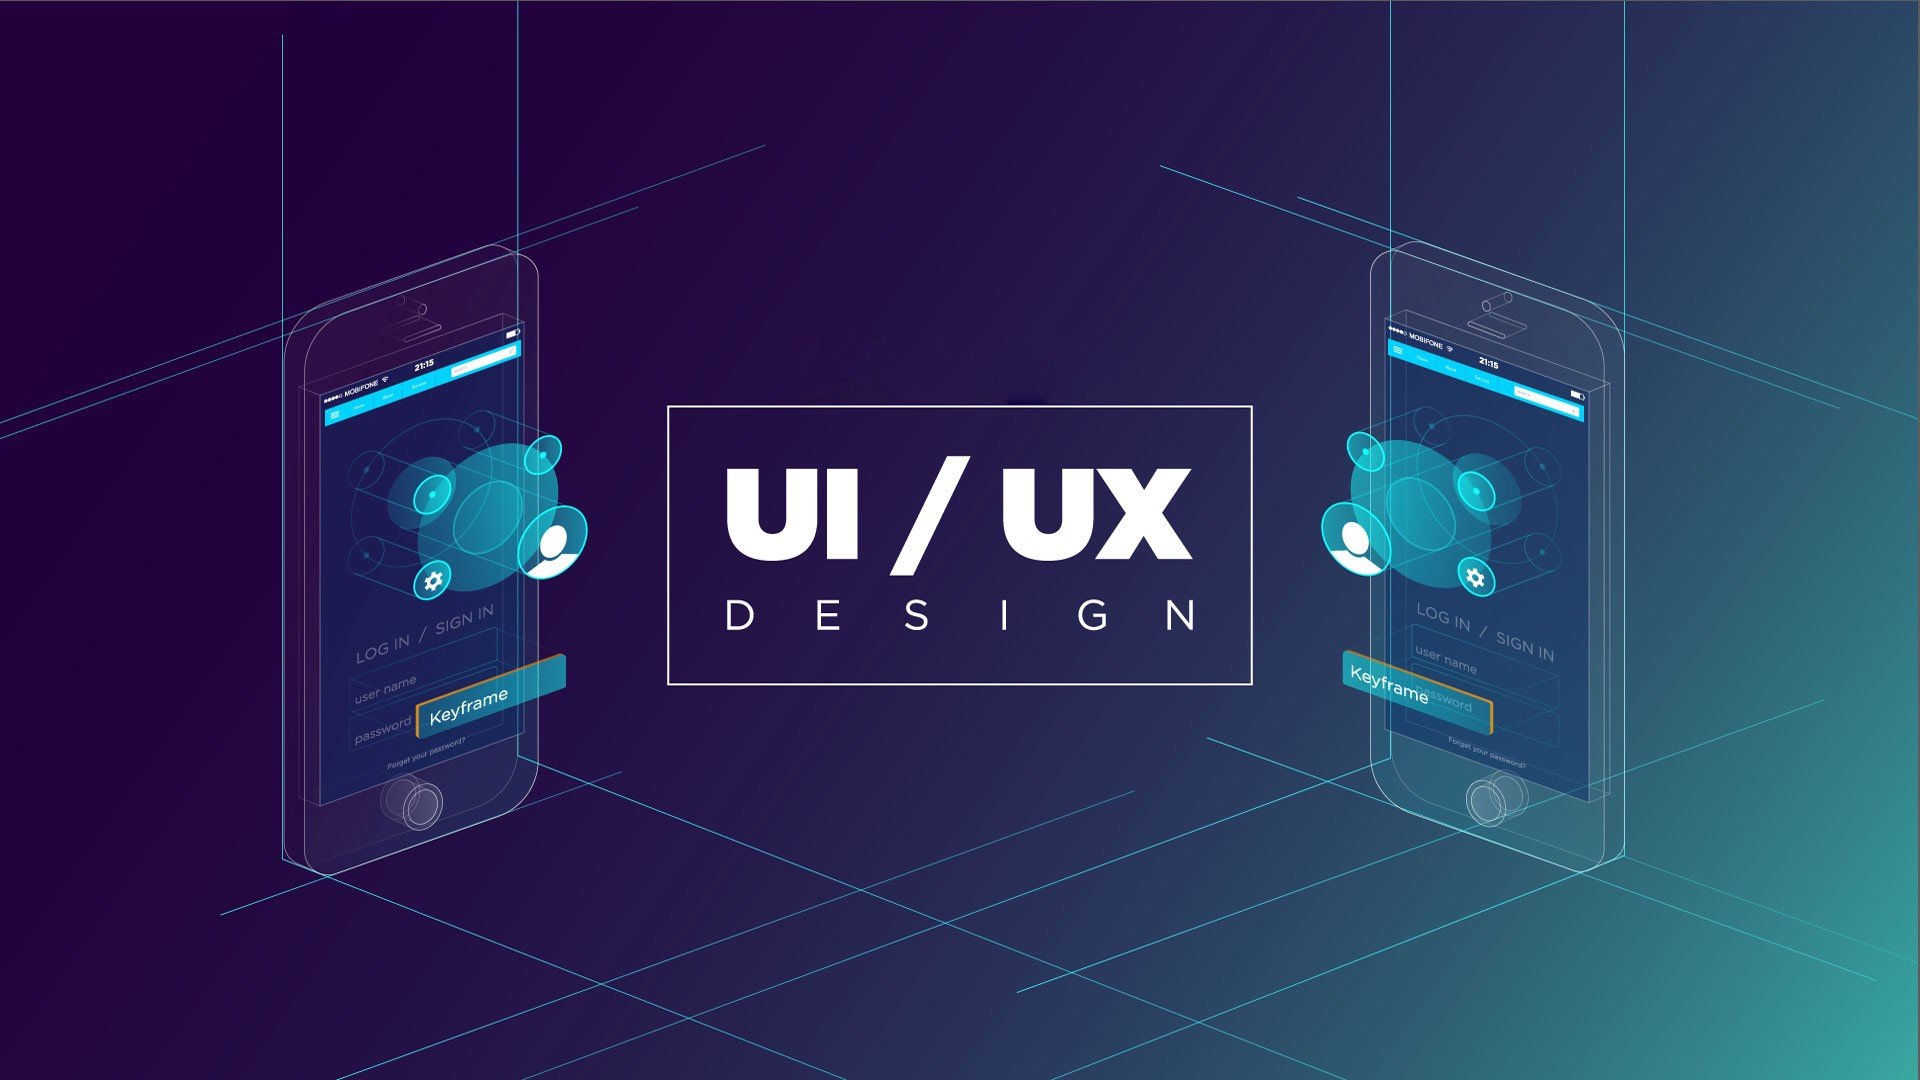 Types Of Content For Cases Of UI UX Design In The Social Networks. By Ilya Dudakov